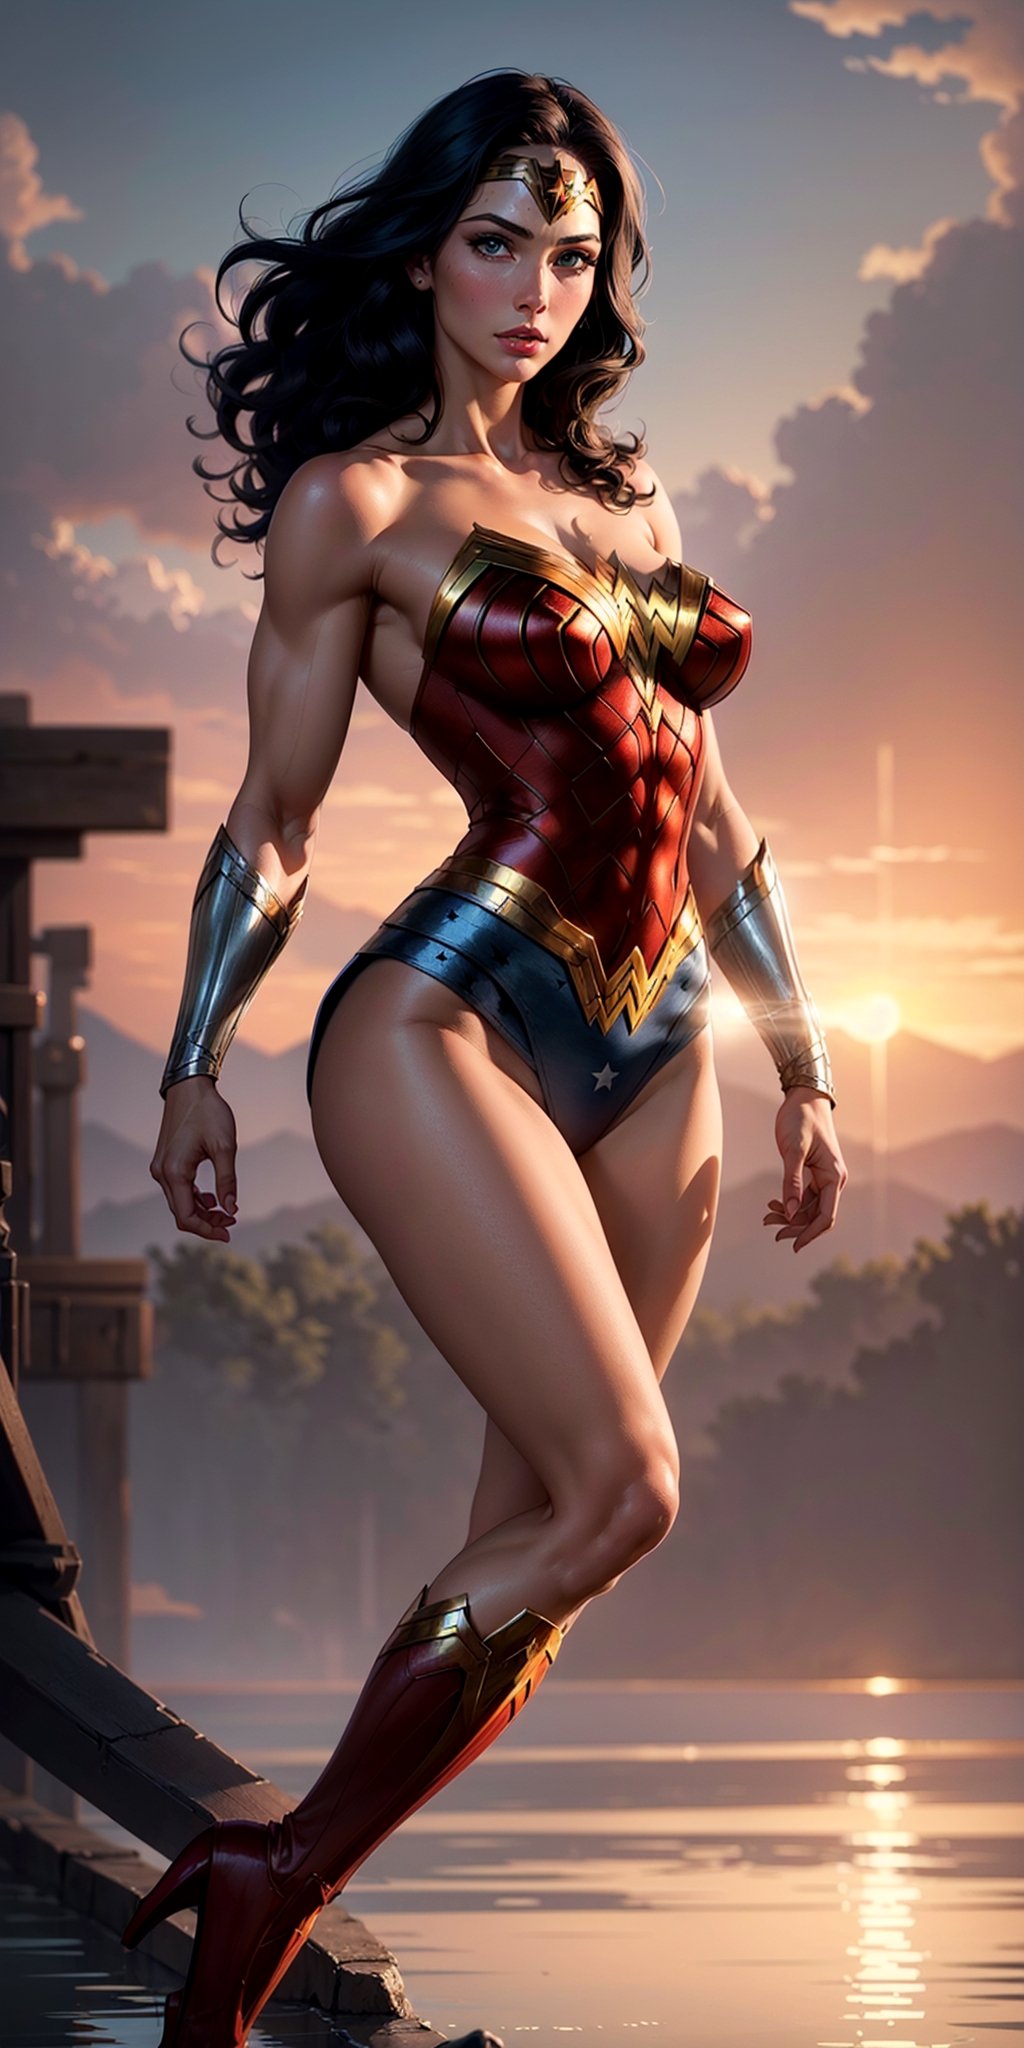 1woman, Wonder Woman, (((floating in the air))),(((flying in the air))), (((flying))),((full body)), ((sunset behind her)),(intricate details, makeup), (delicate and beautiful delicate face, delicate and beautiful delicate eyes, perfectly proportioned face), delicate skin, strong and realistic blue eyes, realistic black hair, lips, makeup, natural skin texture, tiara, jewelry, (star), \(symbol\),(((leotard))), (((wonder woman uniform))), gauntlet, red boots, golden girdle, (public clothing: 1.5), bare shoulders, slightly sunburned complexion, mature, sexy, toned muscles, (muscles:1.2), (((floating in the sky))),((strong and healthy body)), ((((more) muscles))), long legs, curves, (big breasts: 1.3), thin waist, soft waist, (delicate skin), (beautiful and sexy woman), (swollen lips: 0.9), very delicate muscles, standing,(realistic: 1.5), photorealistic, octane rendering, hyperrealistic, tight modeling, (photorealistic face: 1.2), thick eyelashes, long eyelashes, (curly dark hair: 1.1), best quality, half smile, (looking at the viewer), sharp focus, (4k), (masterpiece), (best quality), fantasy, extremely detailed, intricate, hyper detailed, (perfect face), illustration, soft lighting,(specular lighting:1.4), blue eyes, absurdly photorealistic, ultra high resolution, intricate, hyperdetailed, (skindentation), female, detailed body, (detailed face: 1.1), (outlined iris), (hydrocolor lenses), (perfect eyes), 4k, gorgeous, (masterpiece: 1.2), (best quality:1.2),